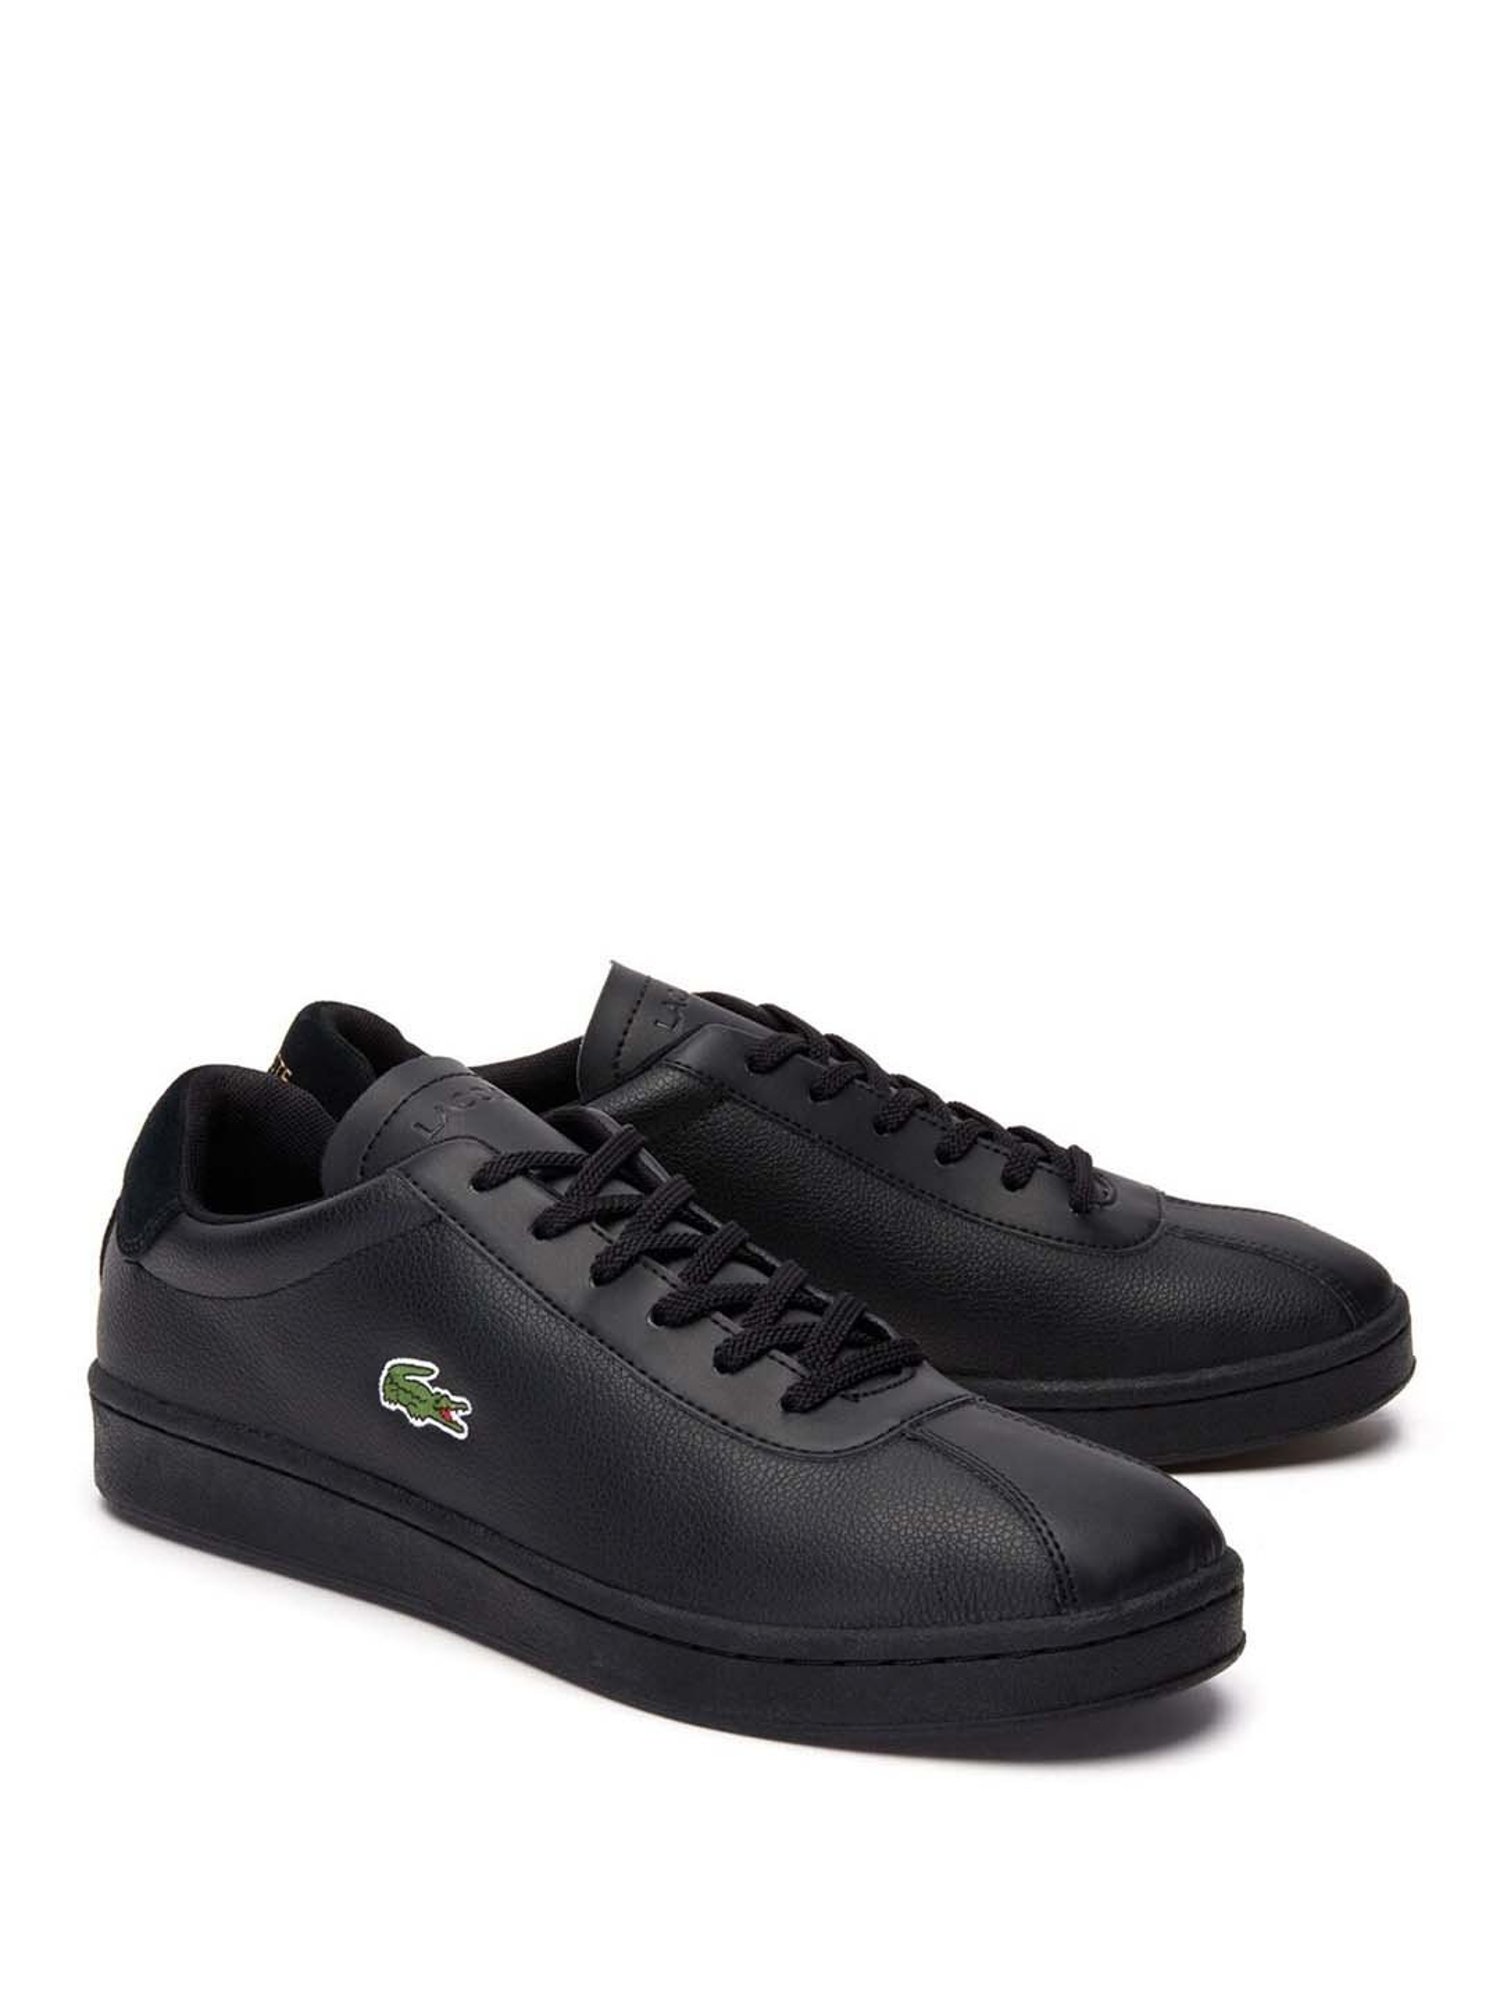 Lacoste Ampthill Leather Mid Sneakers, $92 | Asos | Lookastic